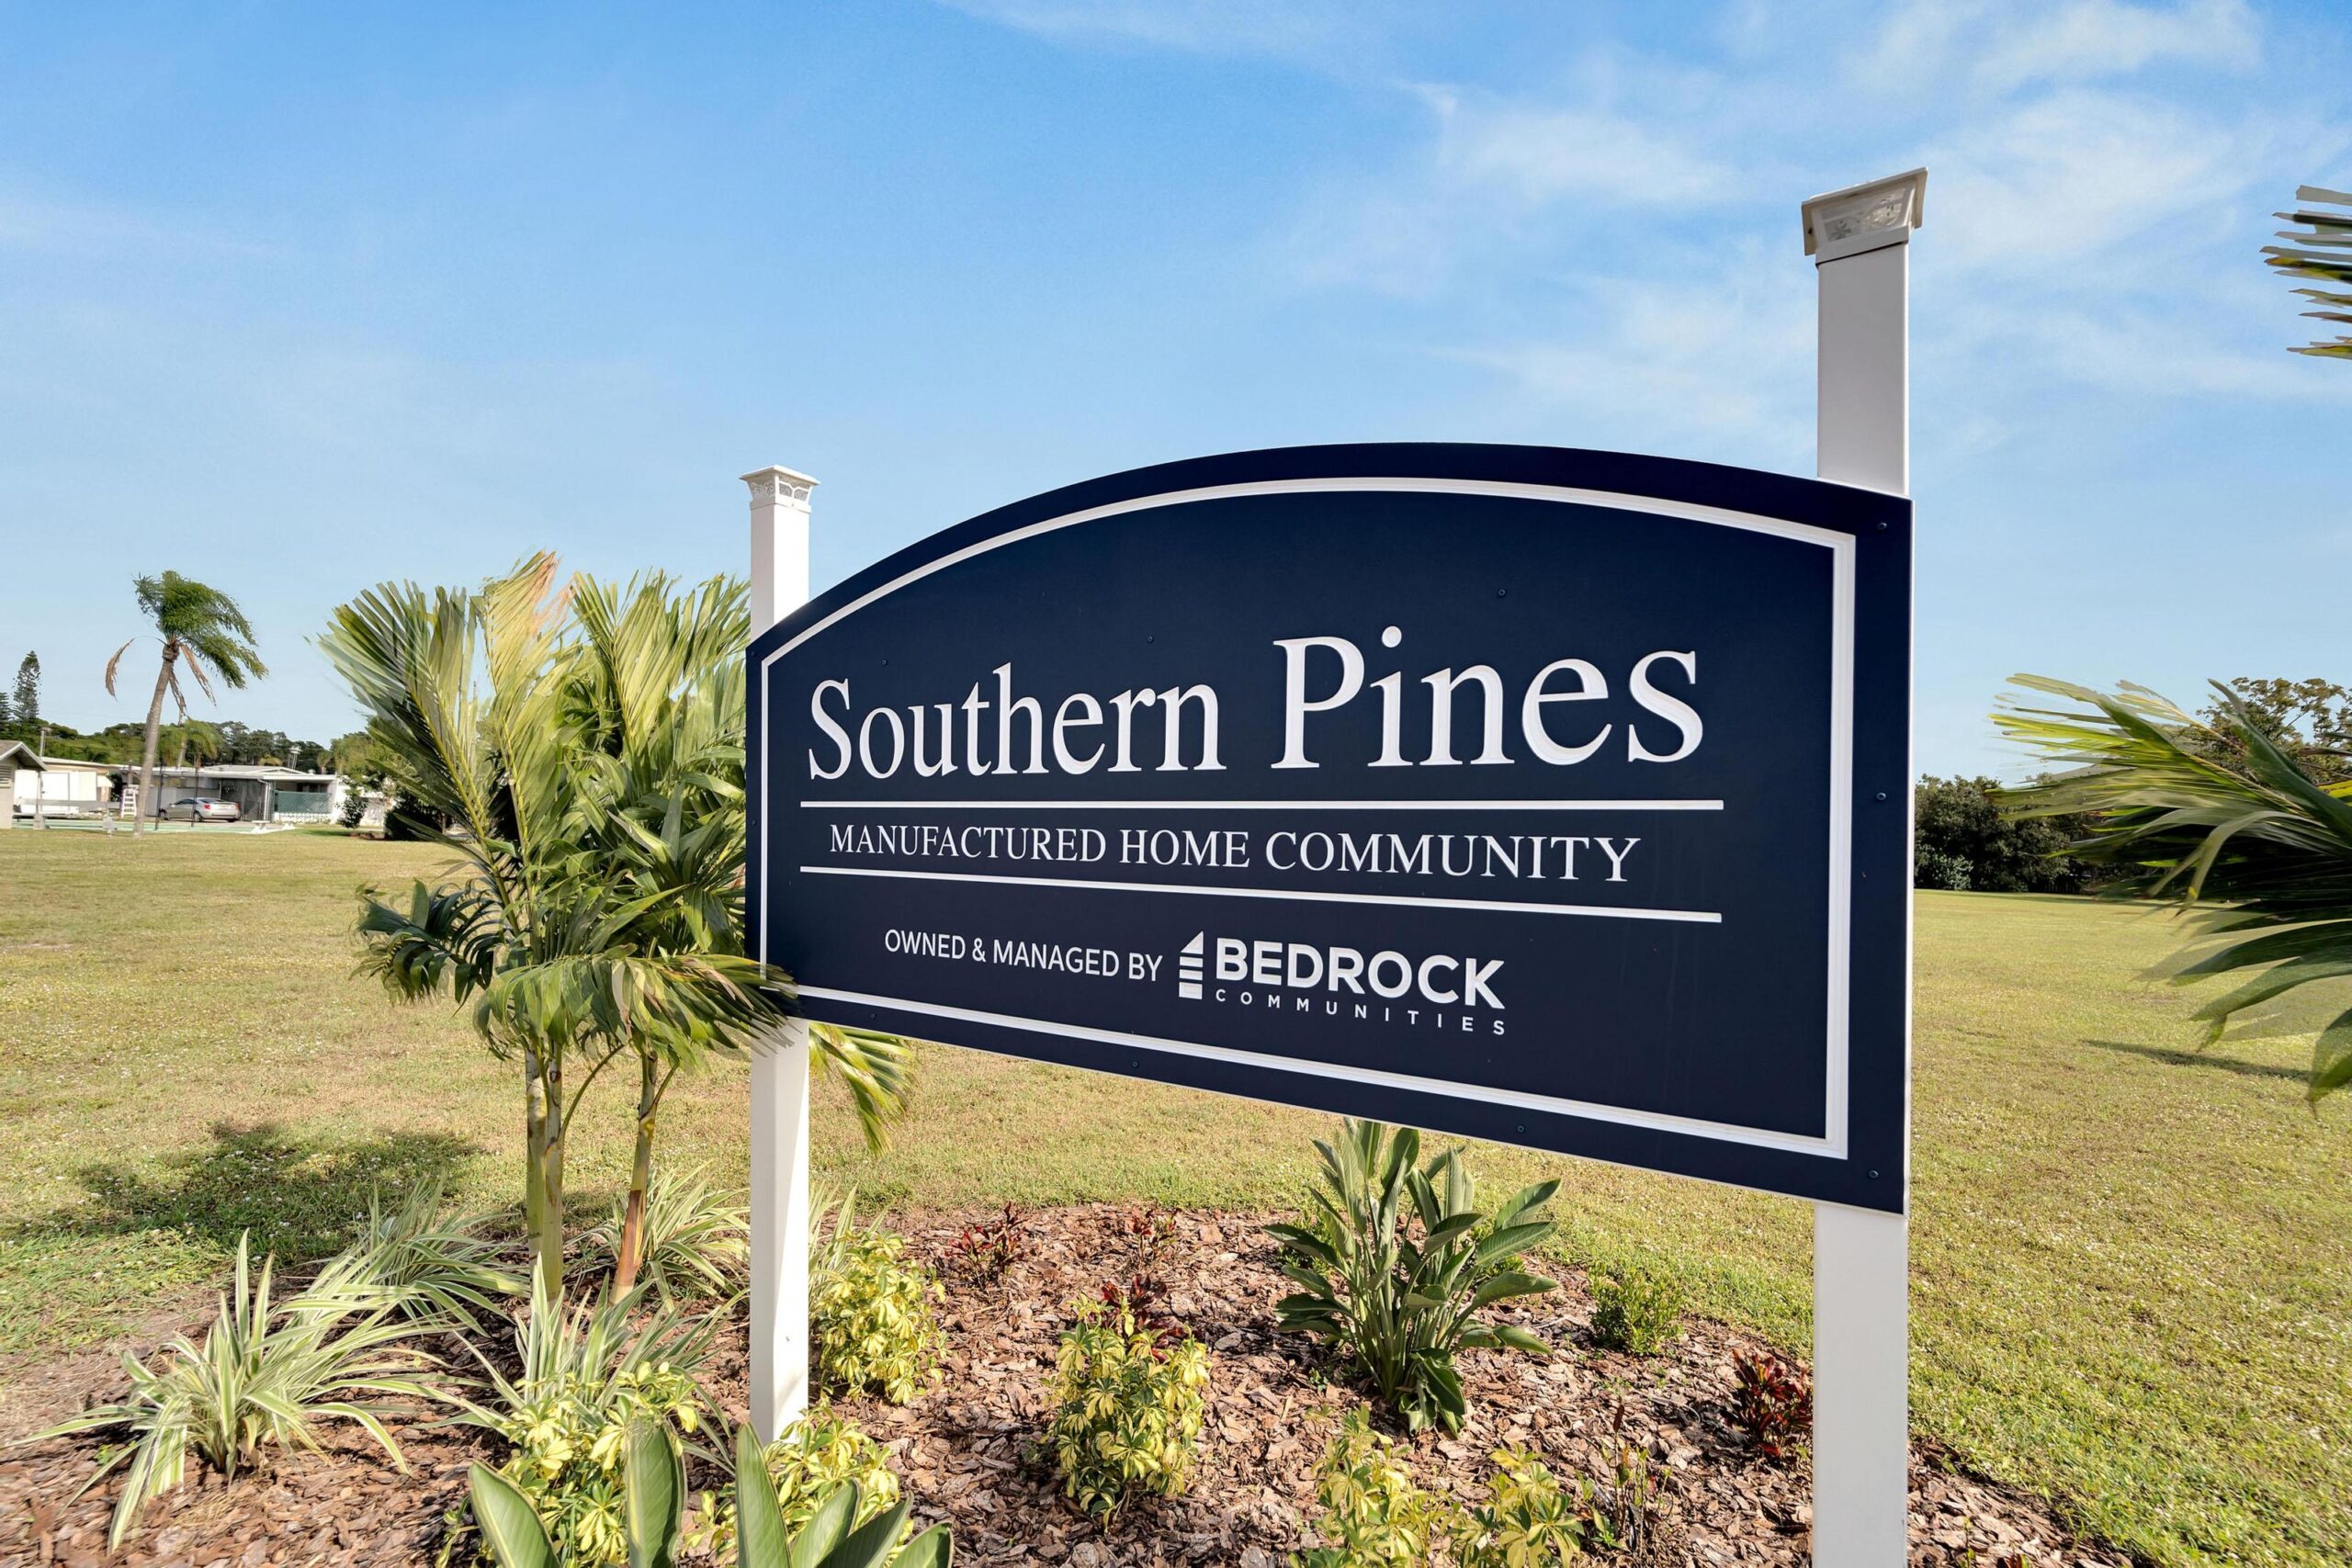 Southern Pines